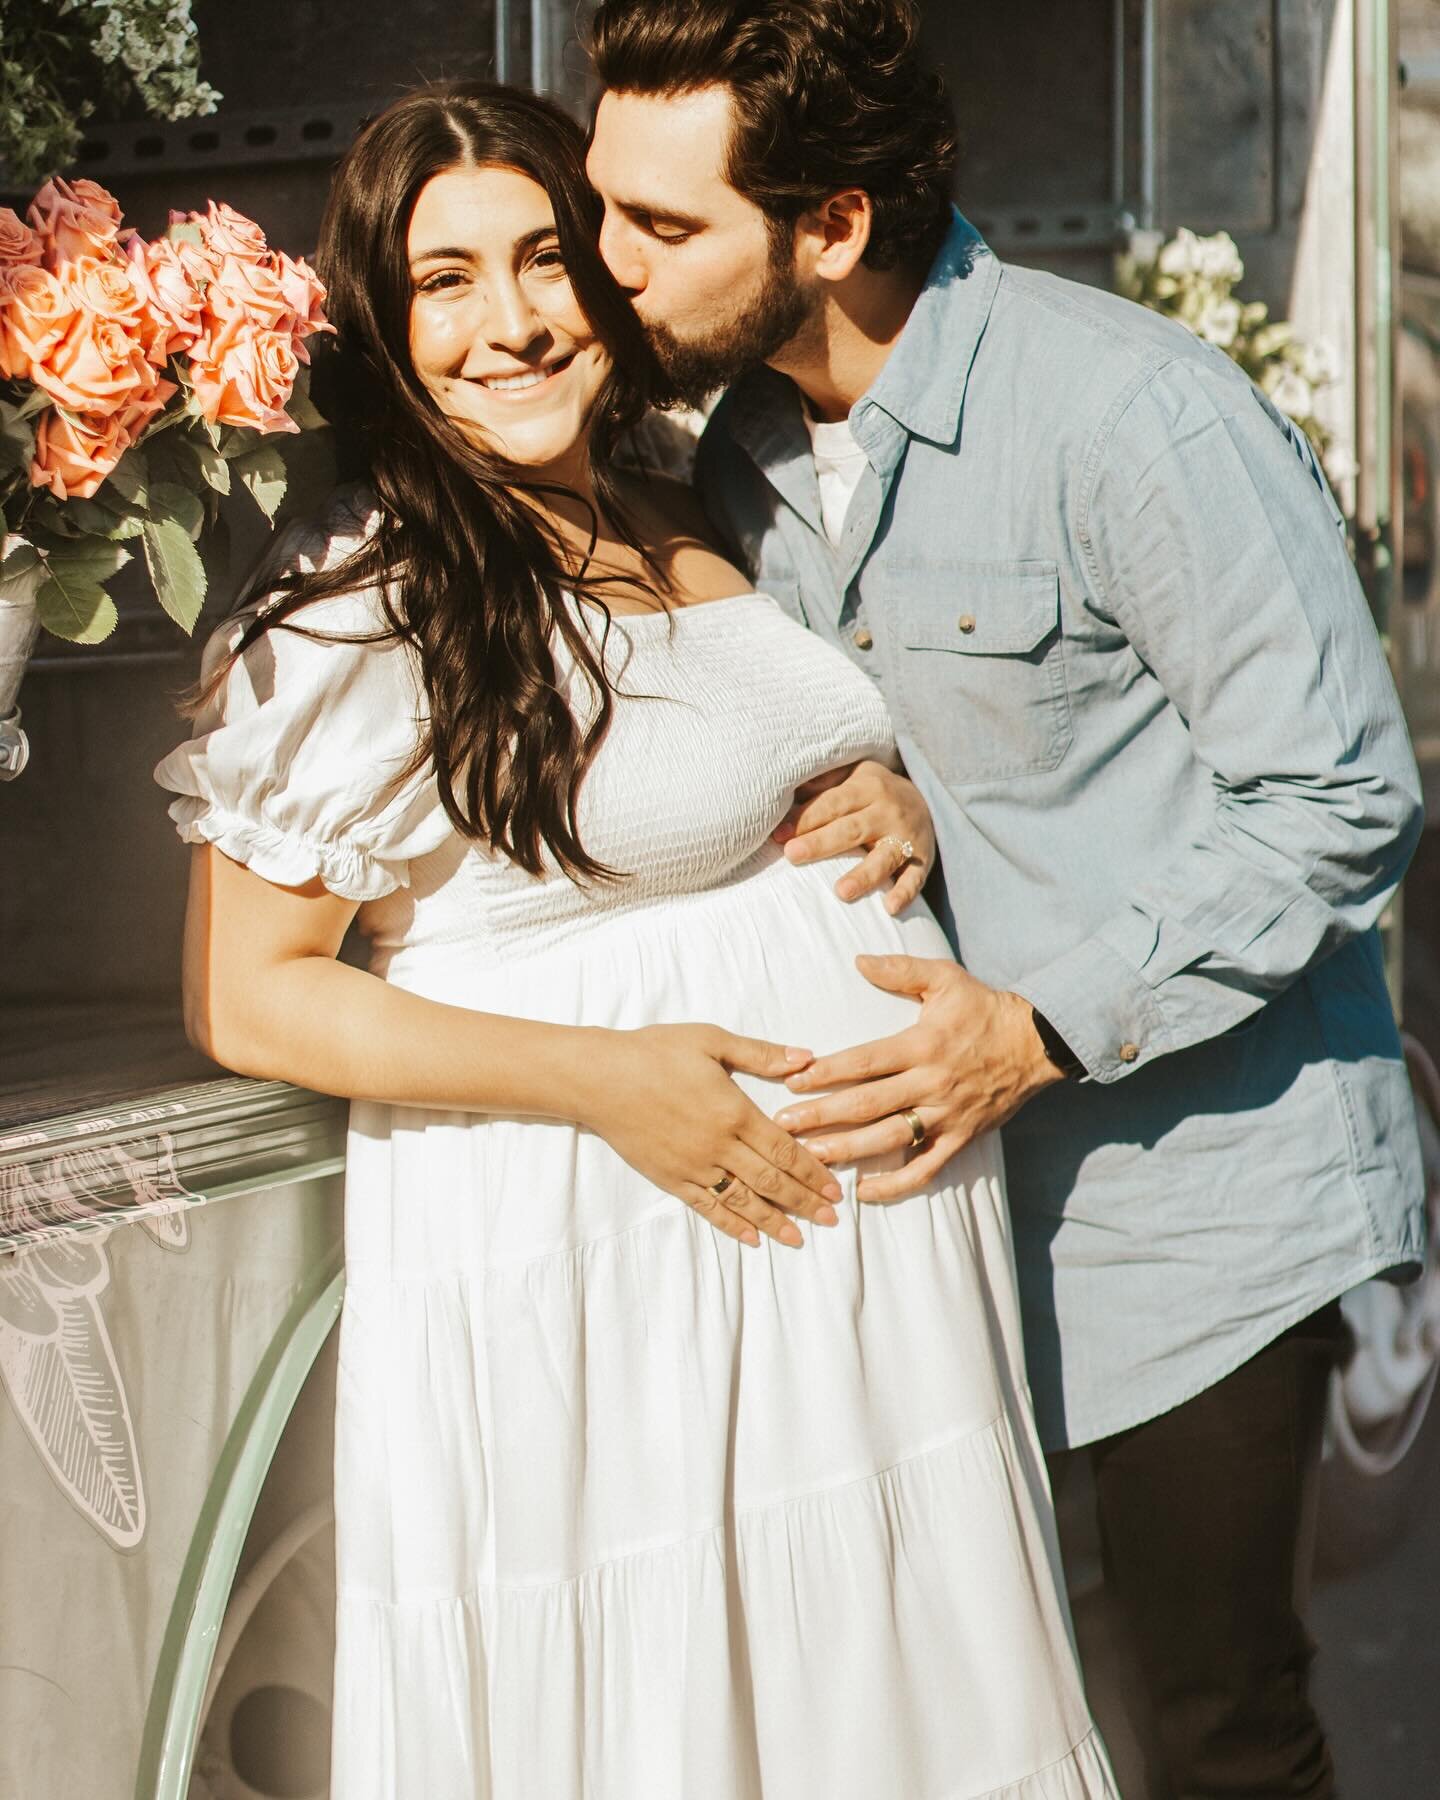 Mom + dad to be stopping by Willow&rsquo;s flower truck Ferdi. 

Contact us to rent Ferdi out for your next photo op. Link in bio!

Photo 📸 by @kristinenicolephoto